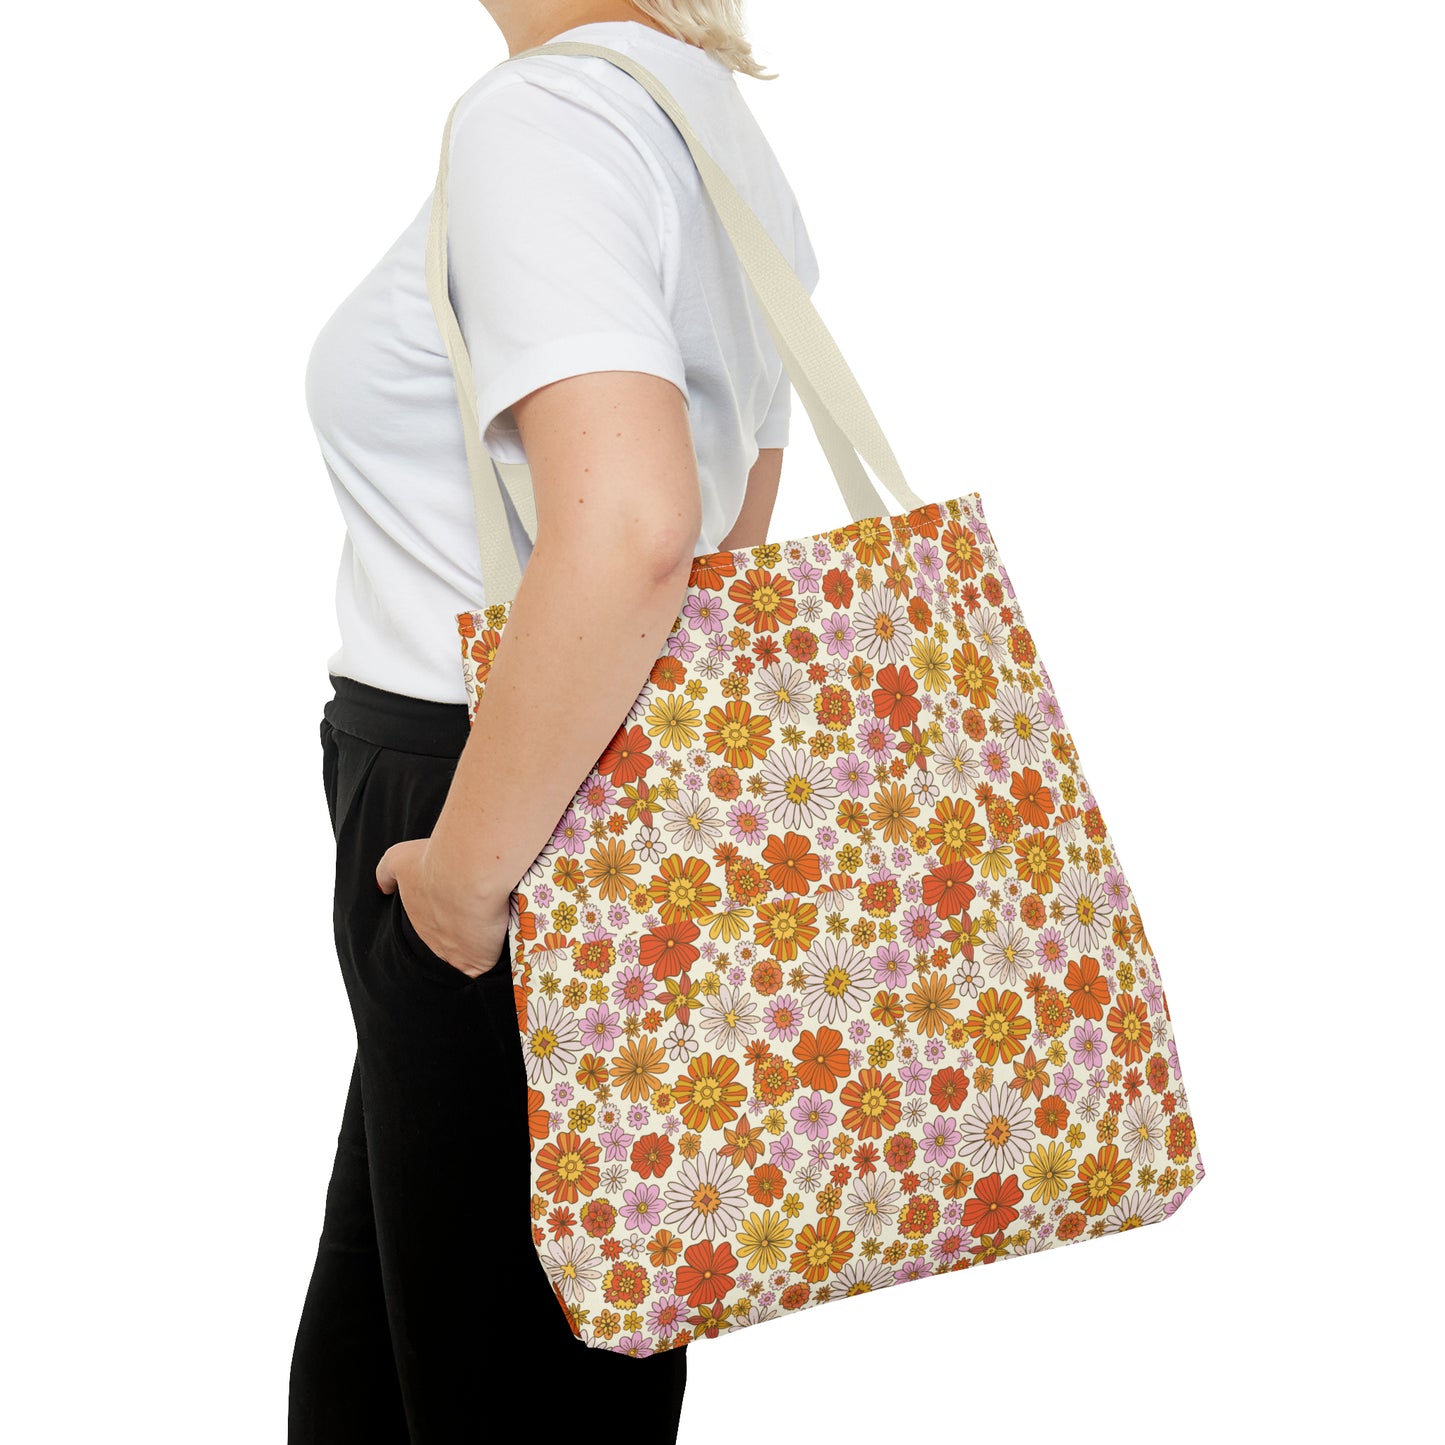 Retro Floral Tote Bag, Vintage Flowers Groovy Orange Cute Canvas Shopping Small Large Travel Reusable Aesthetic Shoulder Bag